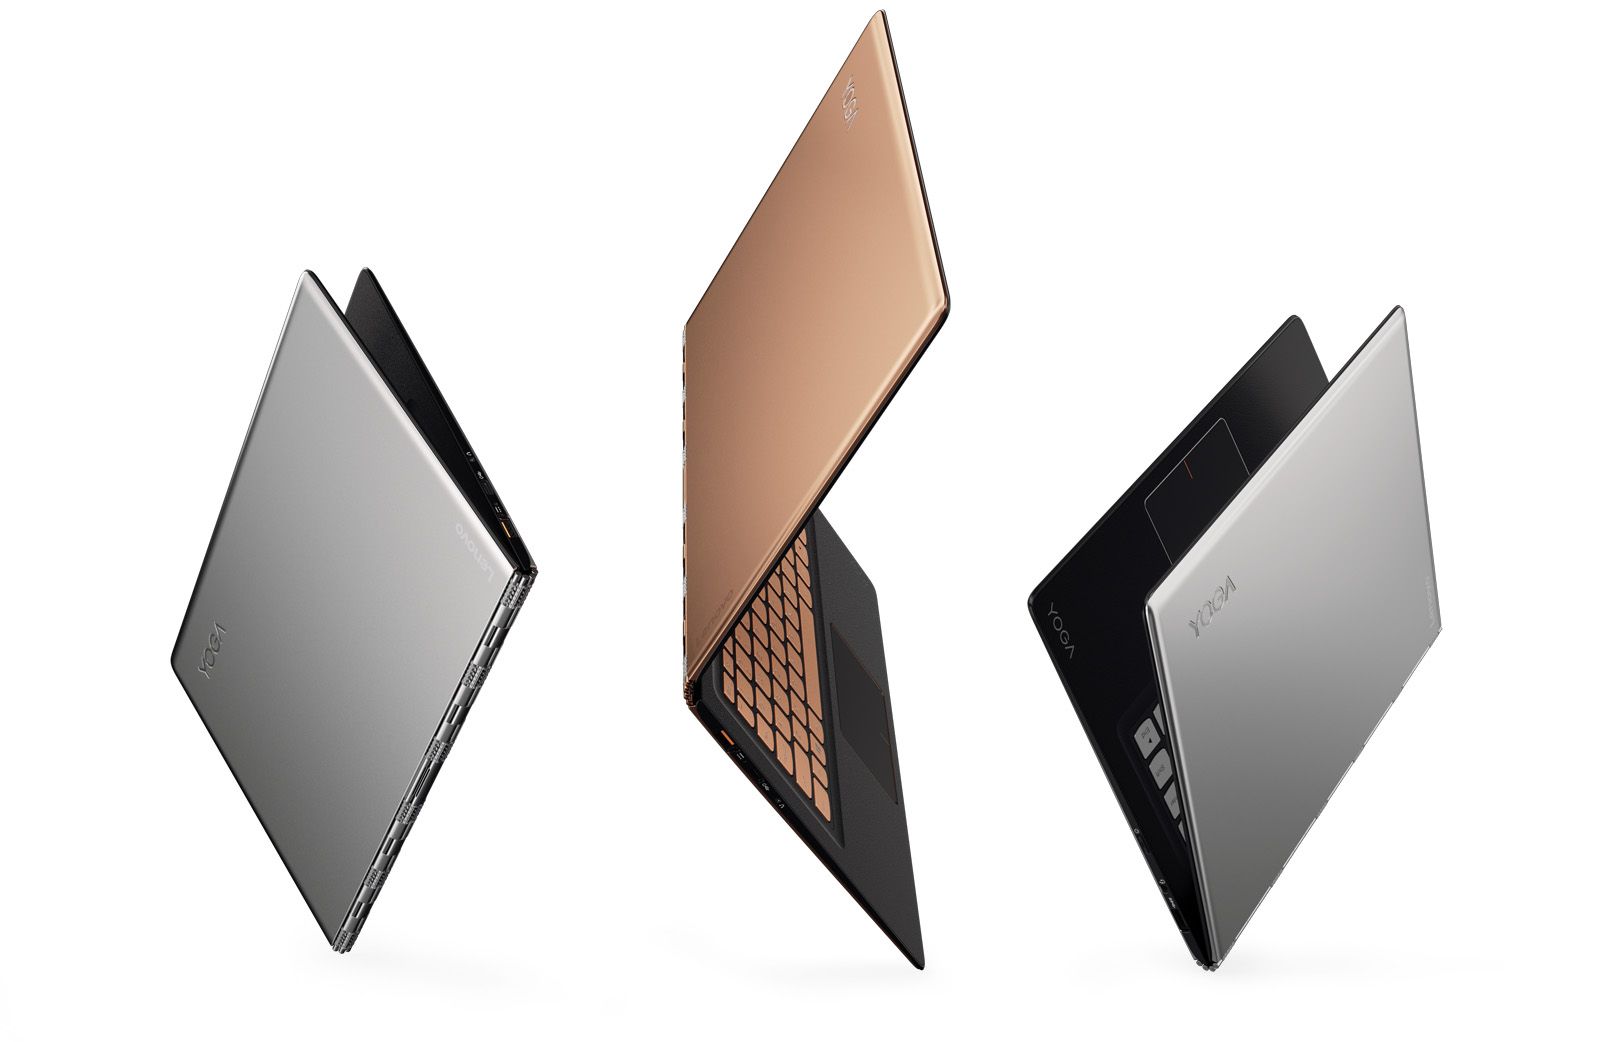 lenovo yoga 900s unveiled as the world s slimmest convertible laptop just 12 8mm thin image 1